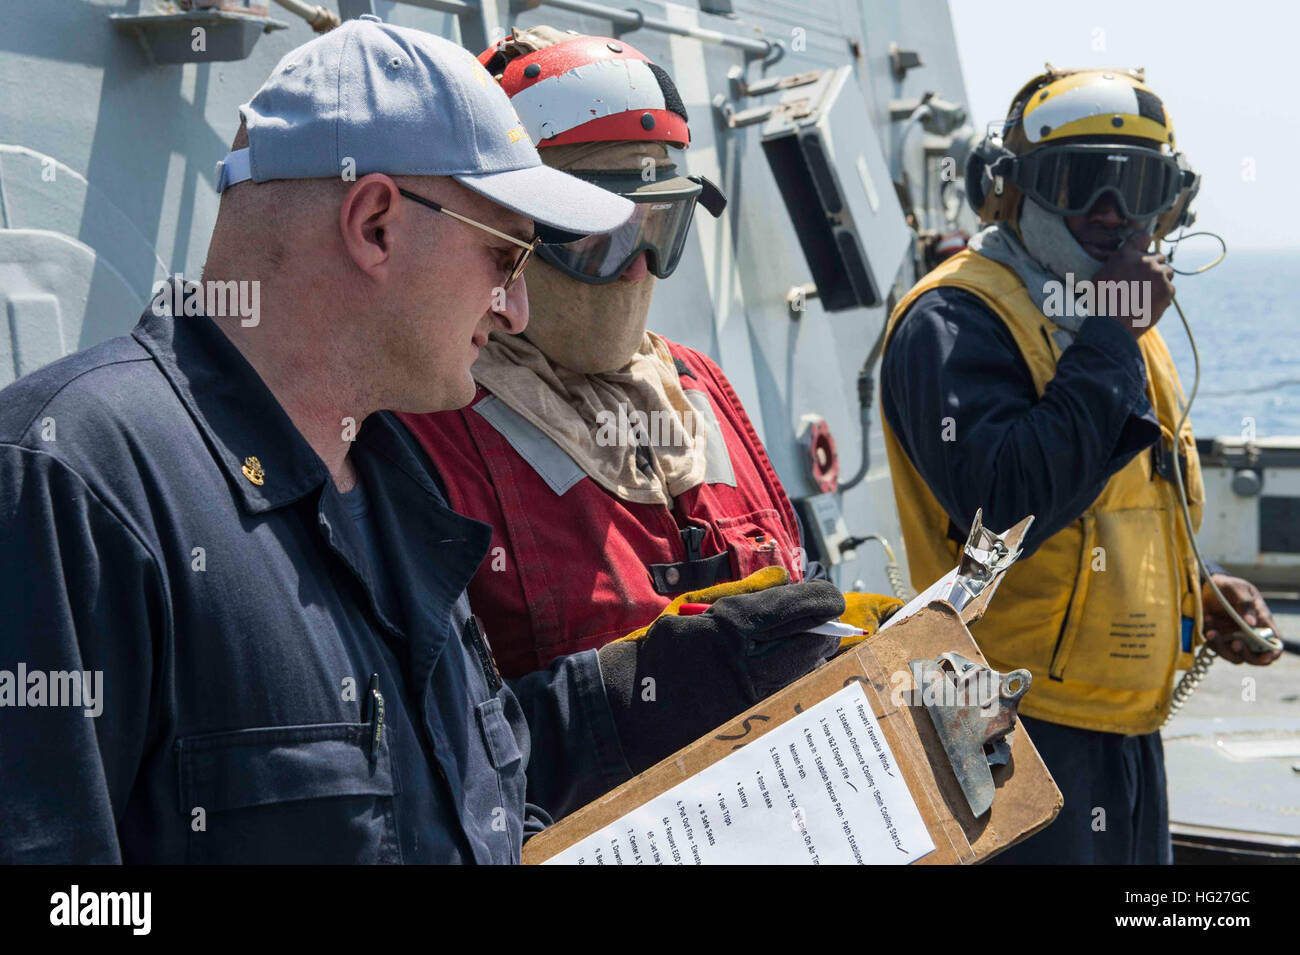 150523-N-VC236-019  GULF OF OMAN (May 23, 2015) - Chief Hull Maintenance Technician Bryan Hatch, from Crestview, Florida, evaluates Damage Controlman 2nd Class Chad McGowan, from Washington, Vermont, during a flight quarters crash and smash drill aboard the guided-missile destroyer USS Farragut (DDG 99). Farragut is deployed to the U.S. 5th Fleet area of operations as part of Theodore Roosevelt Carrier Strike Group supporting Operation Inherent Resolve, strike operations in Iraq and Syria as directed, maritime security operations and theater security cooperation efforts in the region. (U.S. Na Stock Photo